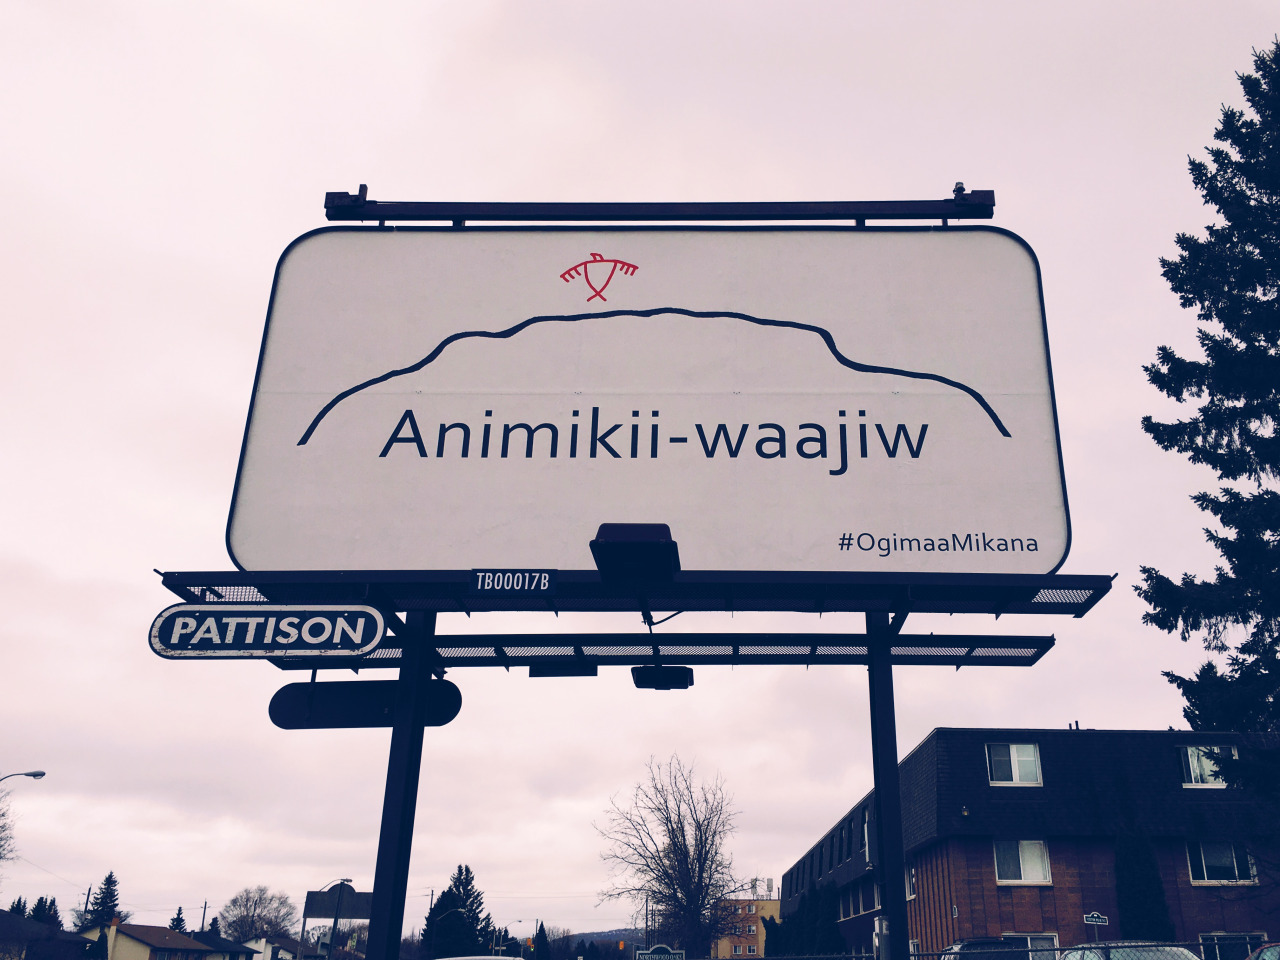 ANIMIKII-WAAJIW SIGN UP IN FORT WILLIAM THROUGH THE OGIMAA MIKANA PROJECT